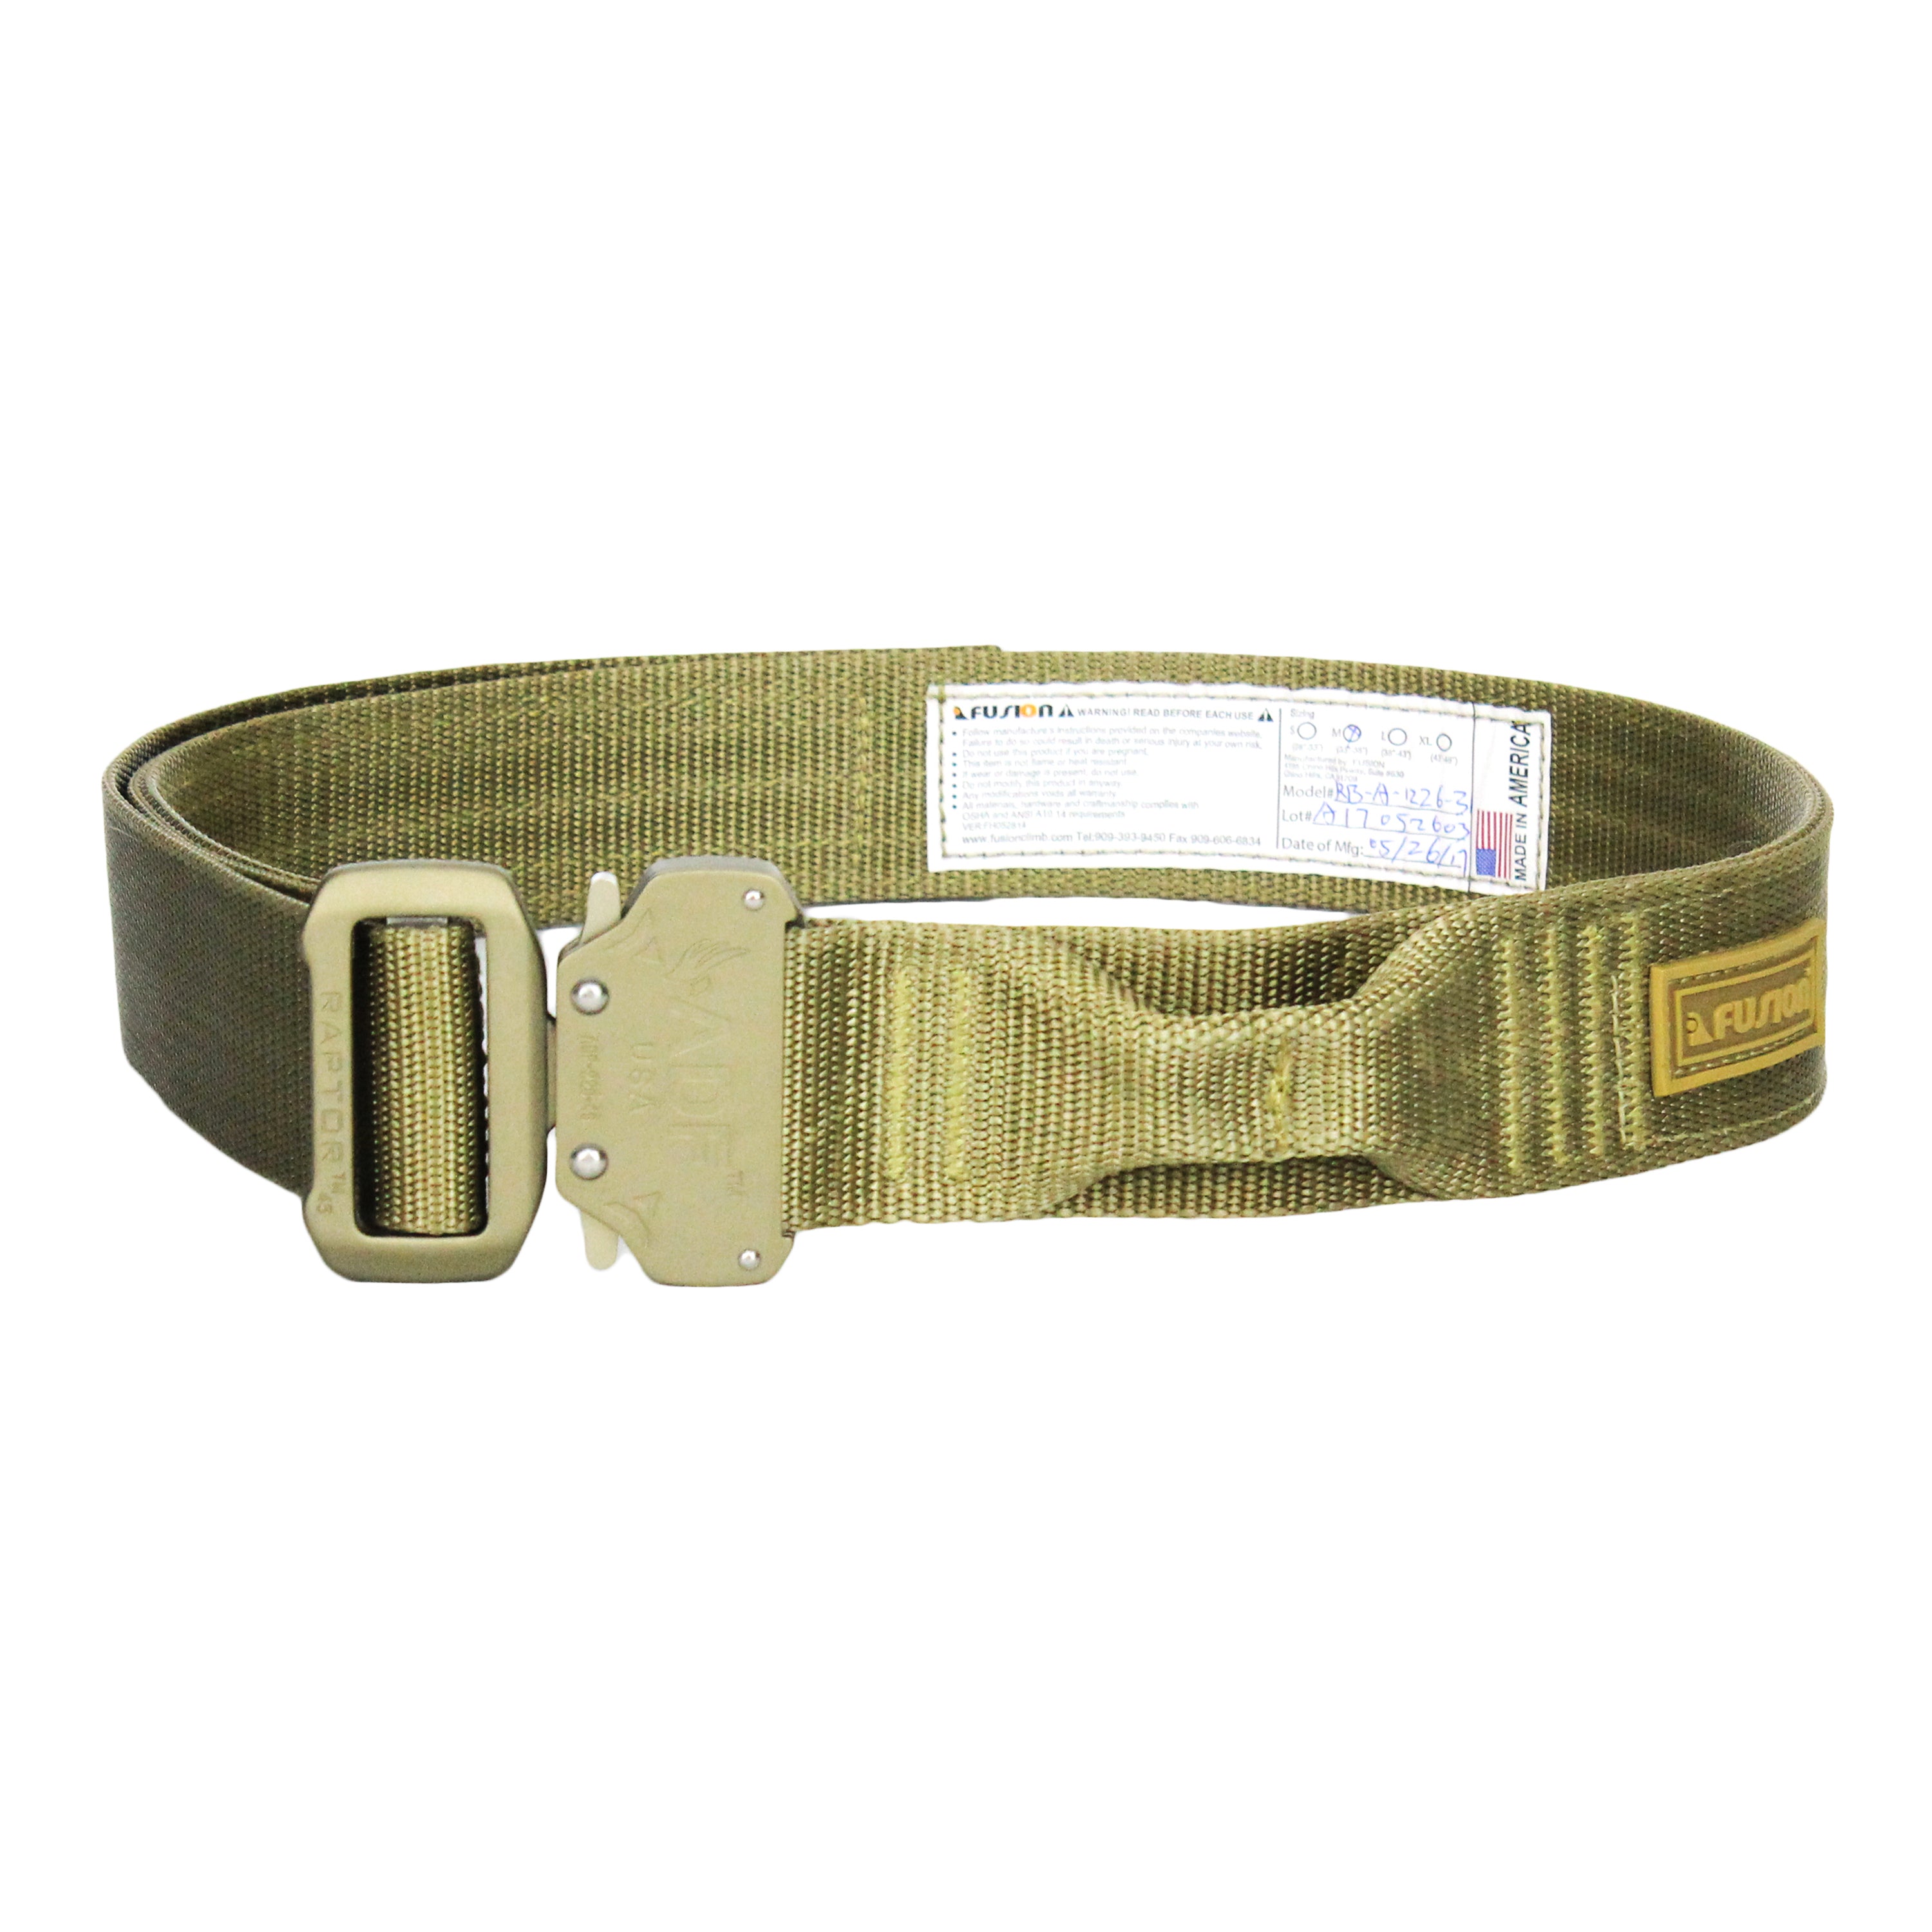 Riggers Belt - Type A - 1.75 Width - Undefeated – Fusion Tactical